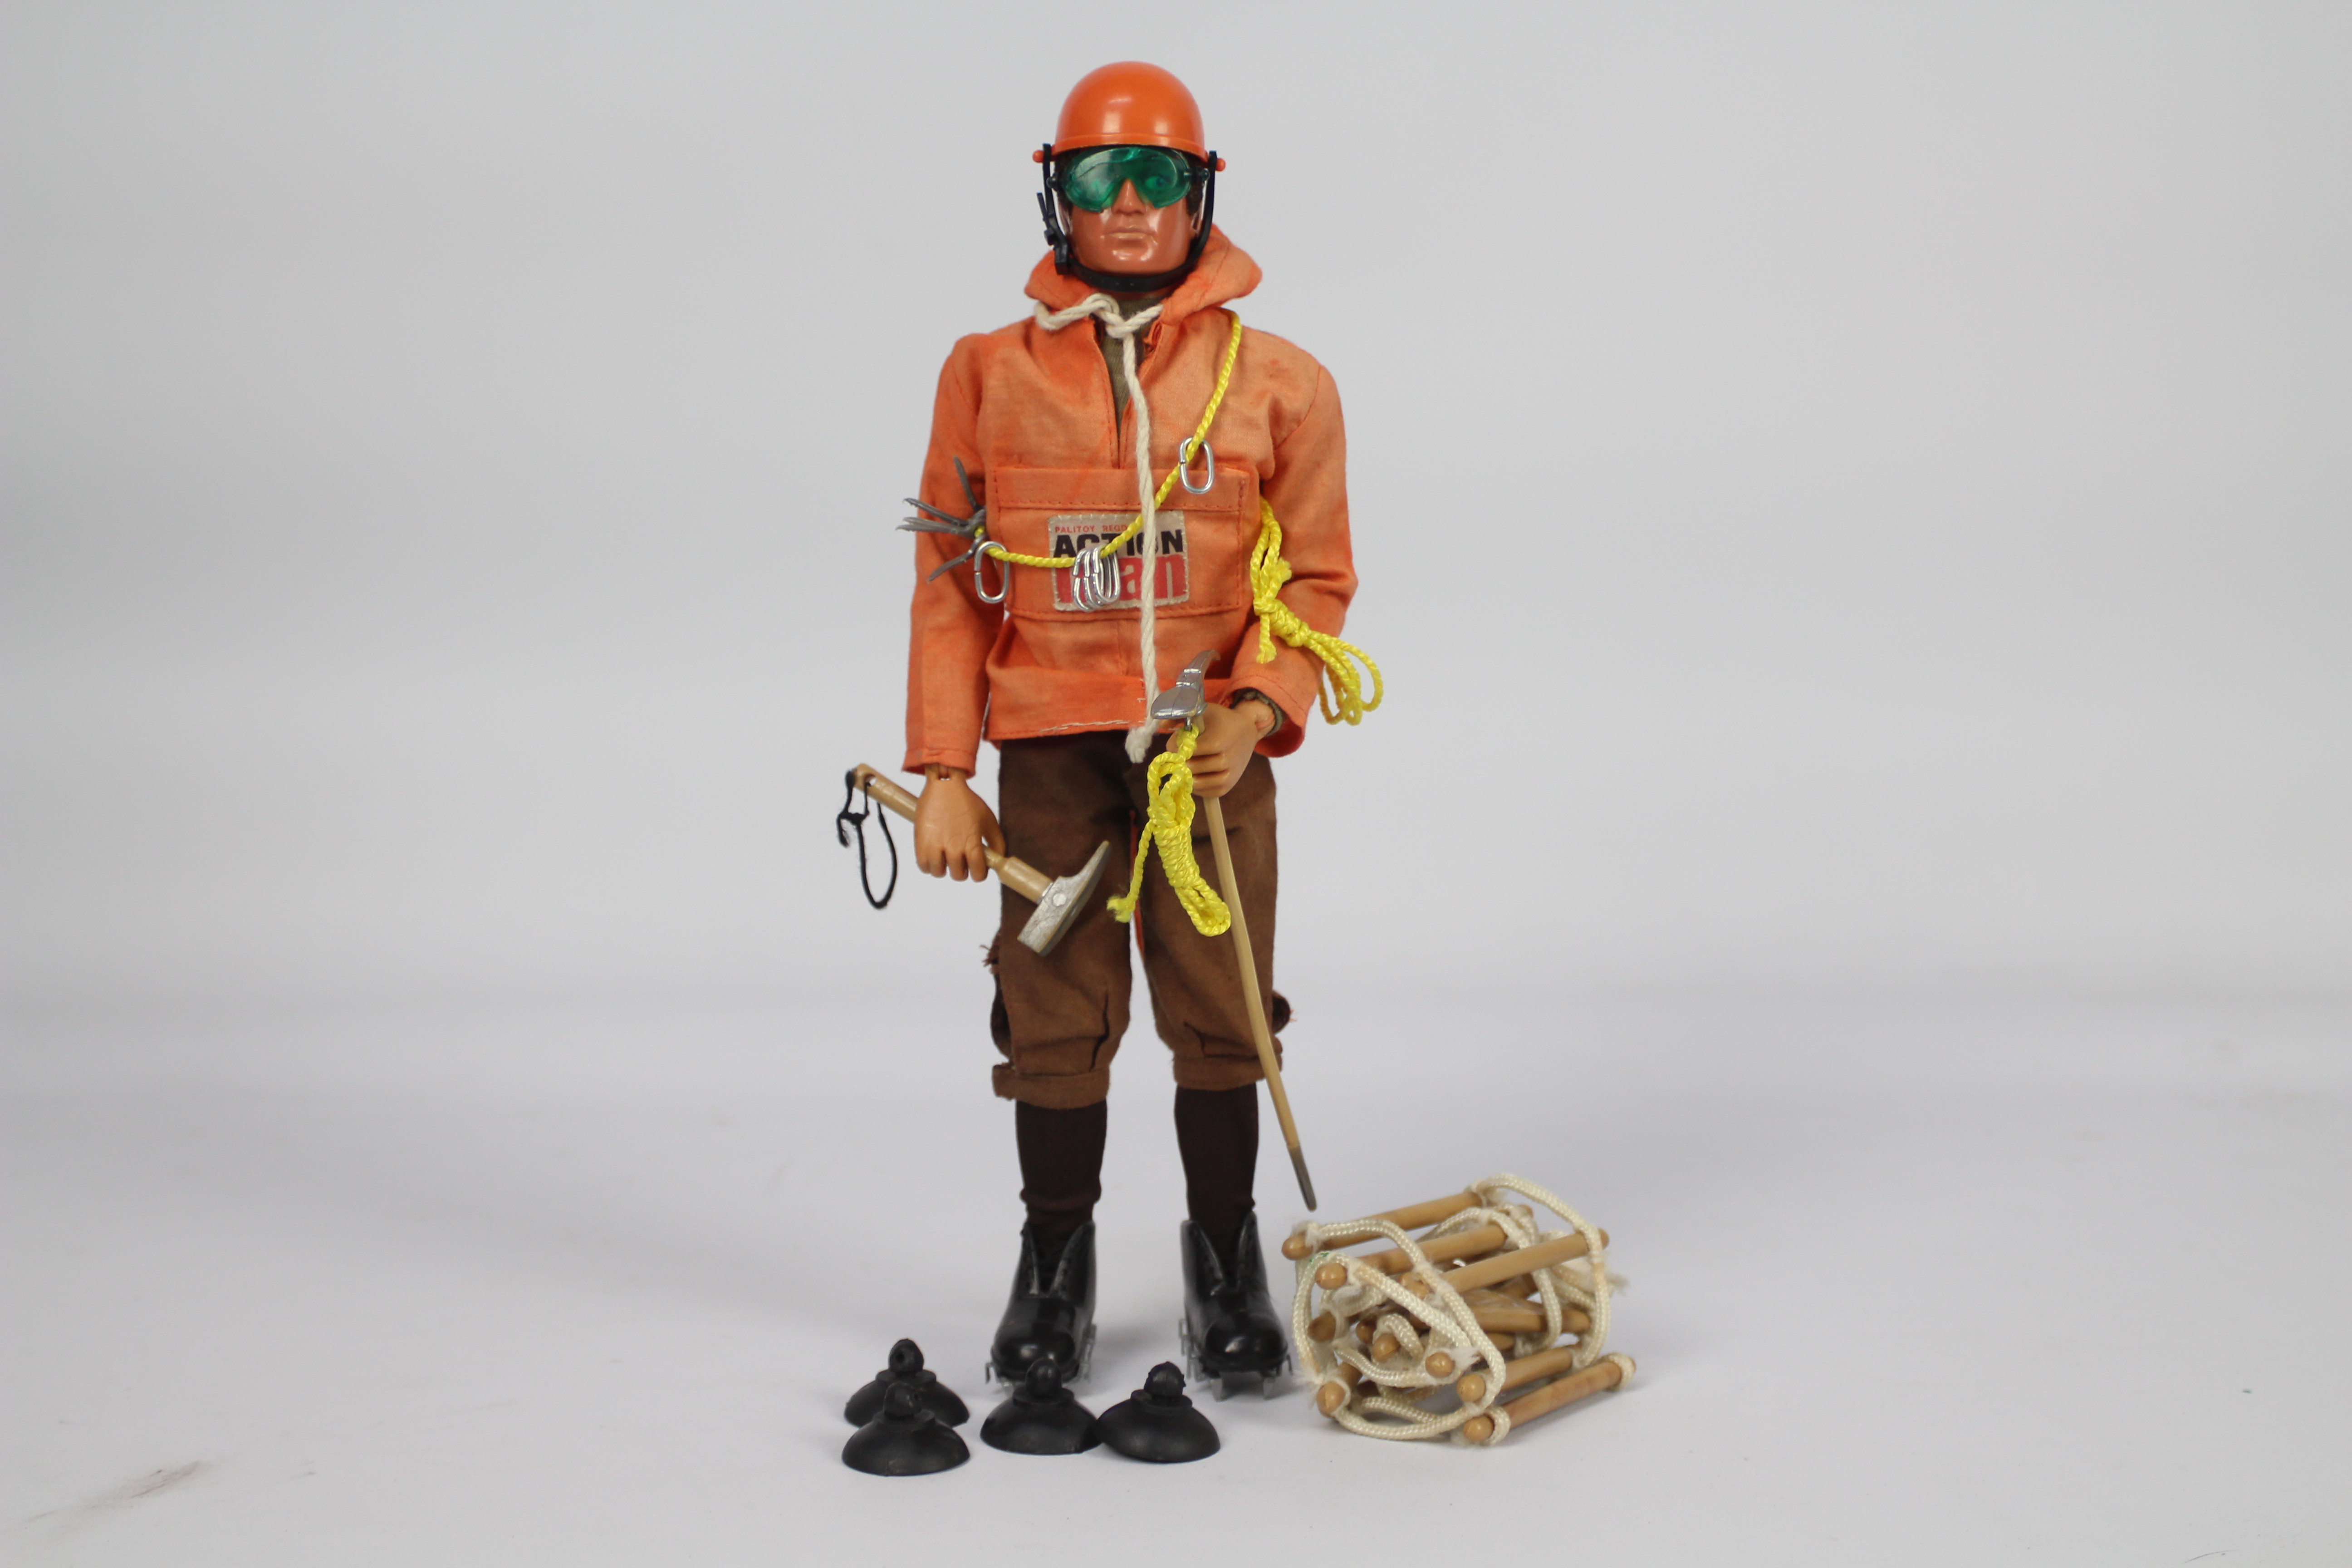 Palitoy, Action Man - A Palitoy Action Man figure in Mountaineer outfit.